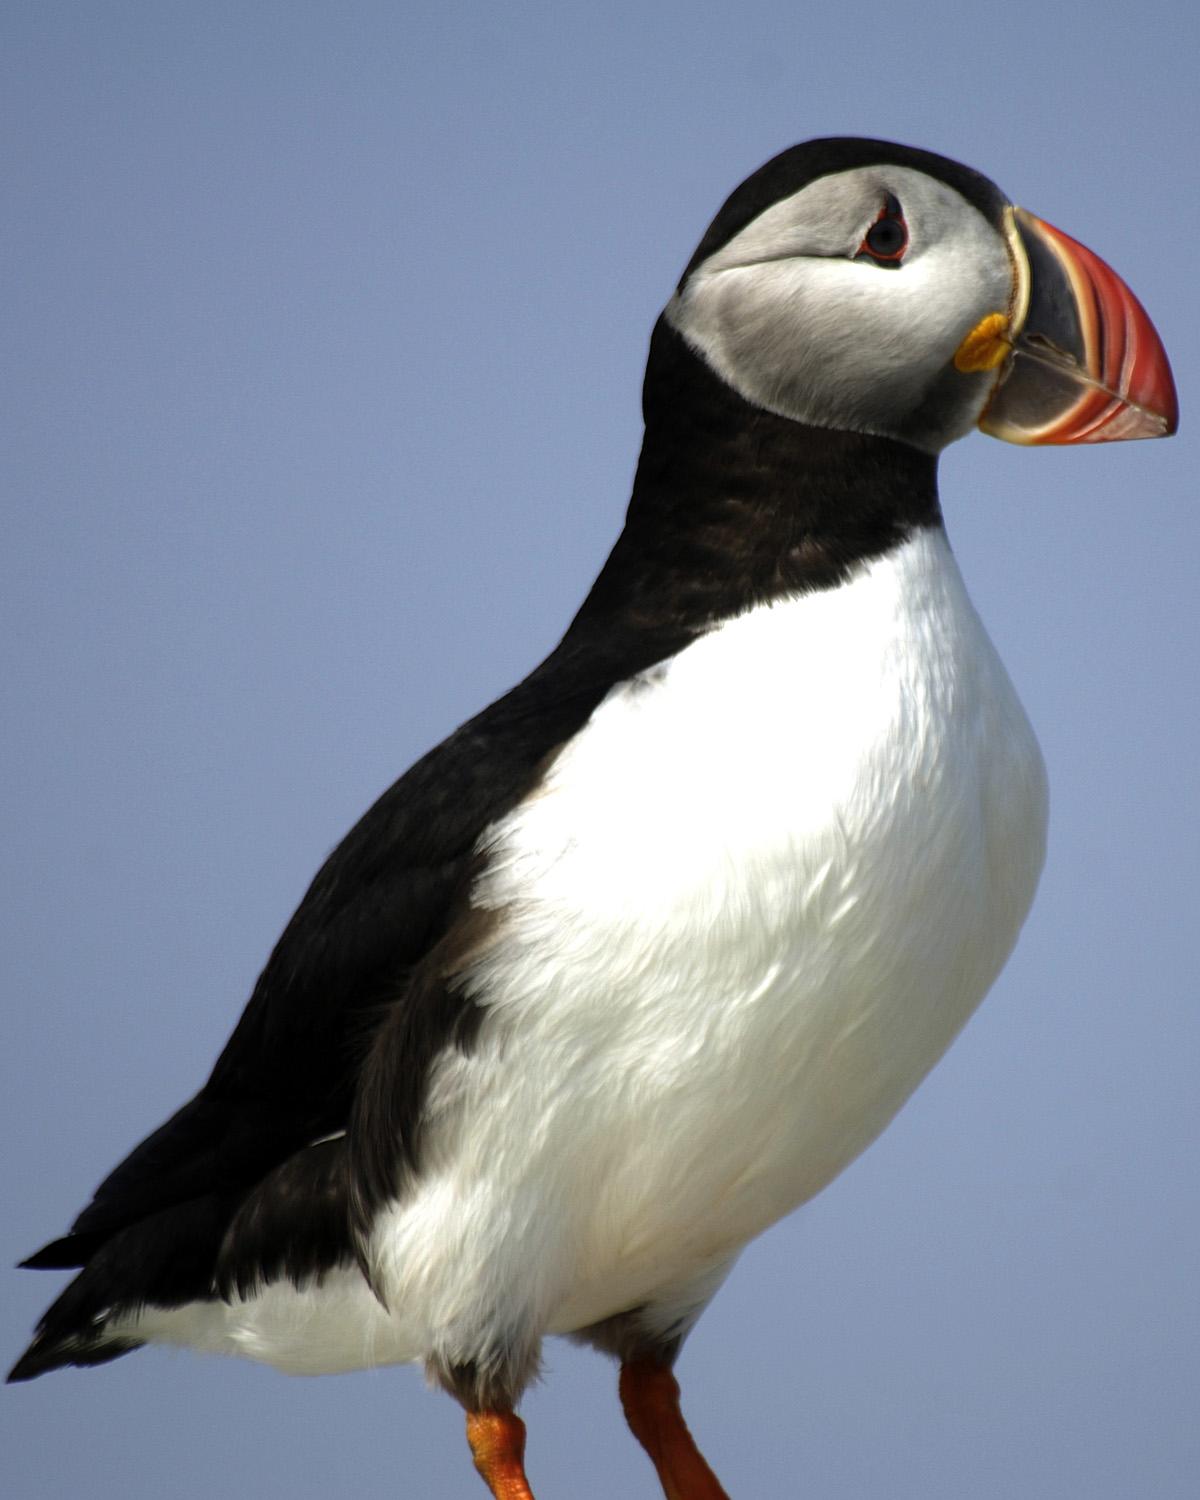 Atlantic Puffin Photo by Magill Weber